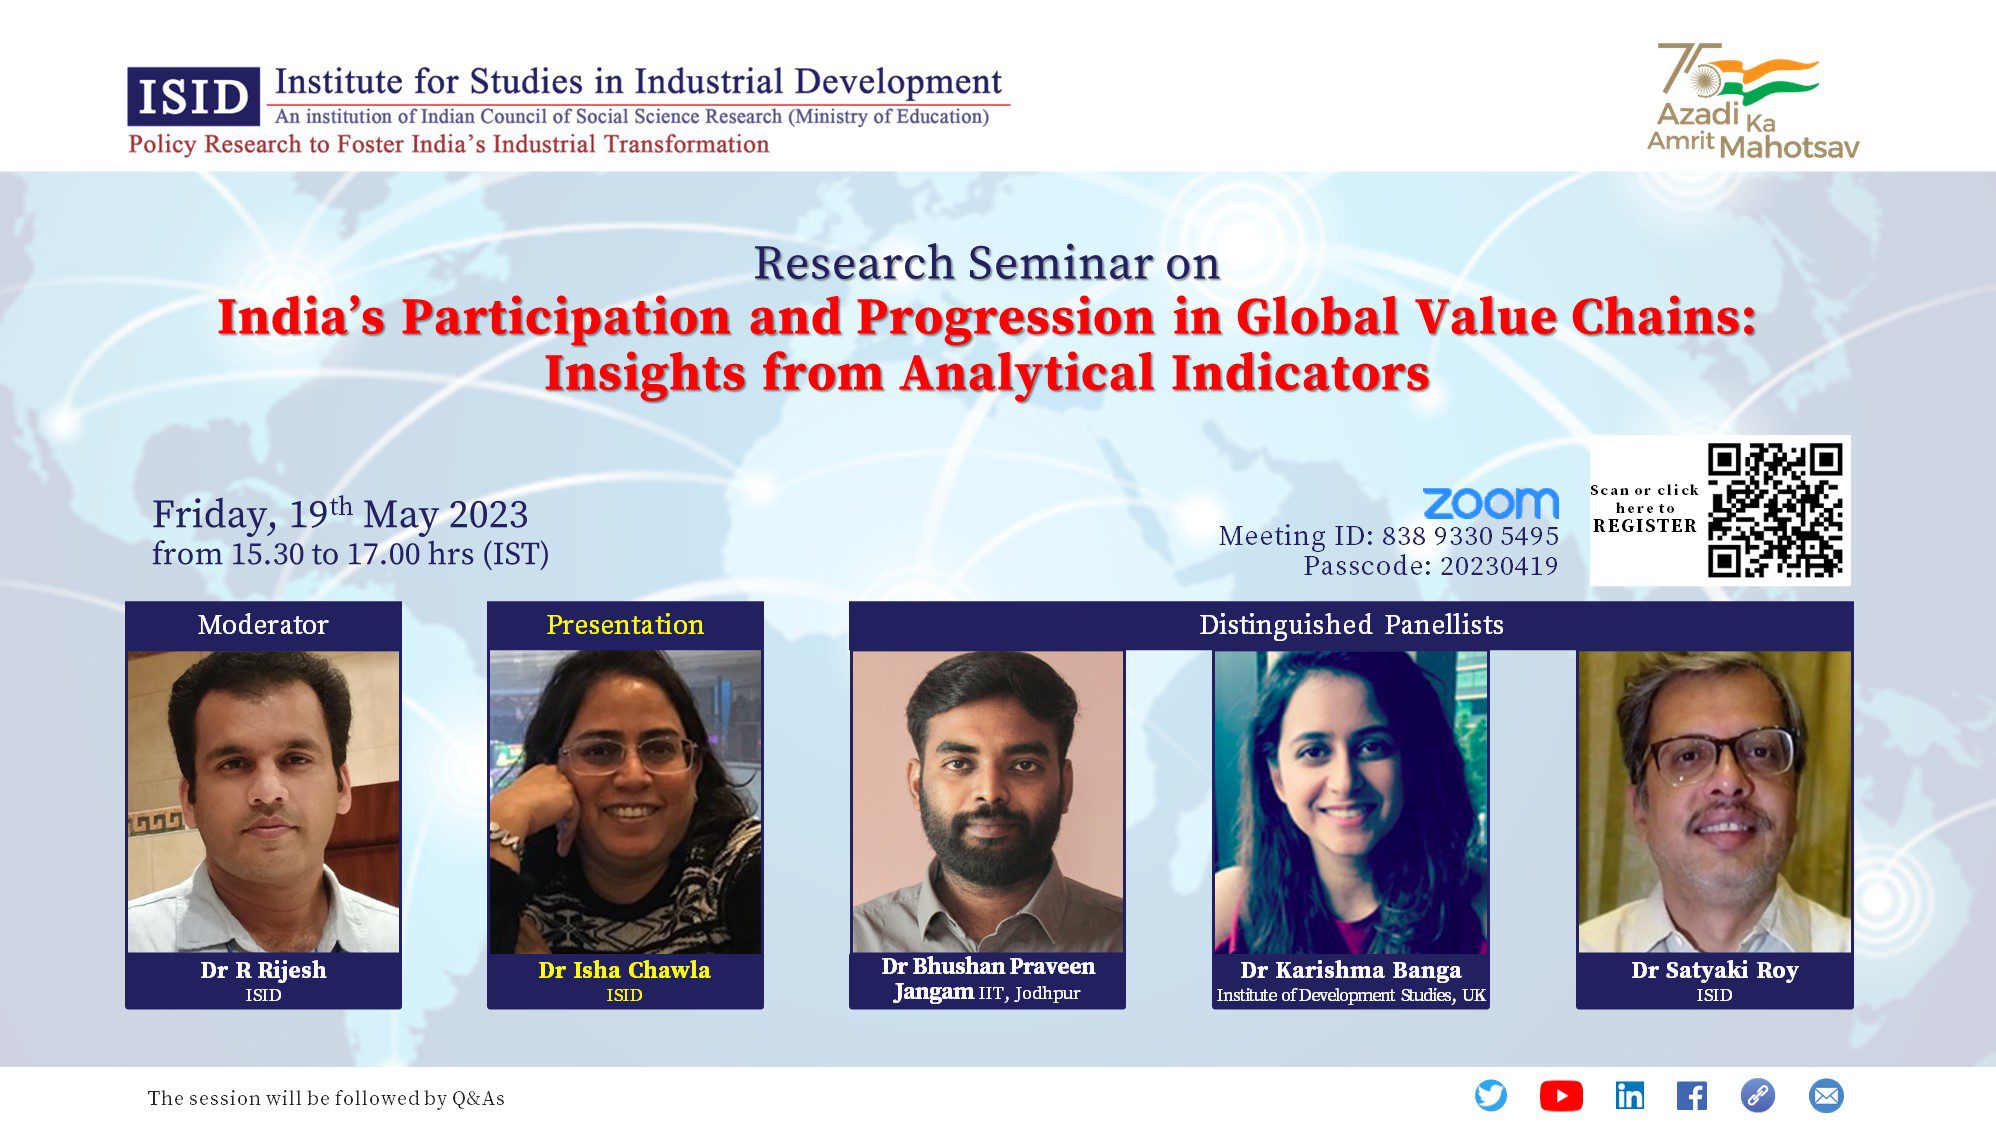 India’s Participation and Progression in Global Value Chains: Insights from Analytical Indicators